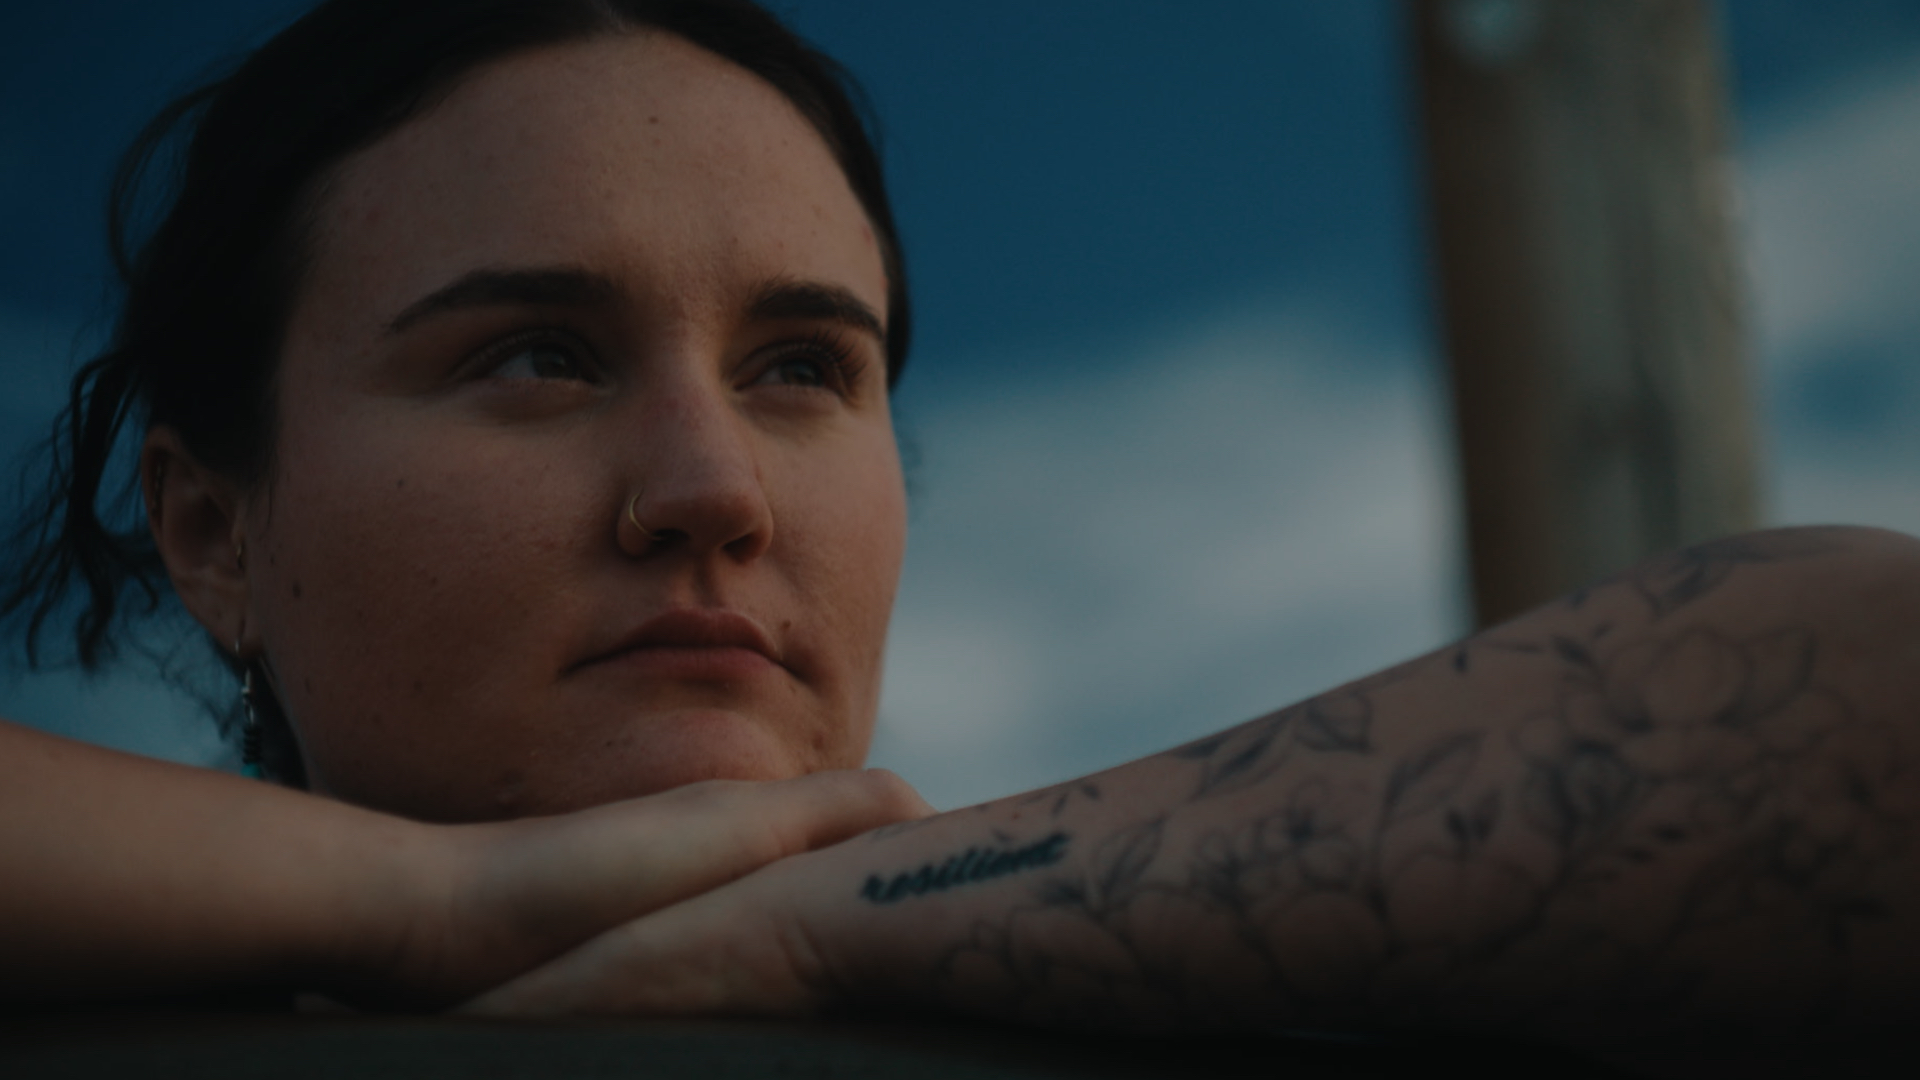 A film still from Of Medicine and Miracles that shows a young woman with a nose ring looking thoughtfully off to the side. Her arms, one adorned with dainty floral tattoos, are crossed atop each other, with her head gently resting on her hands against a dark blue sky.